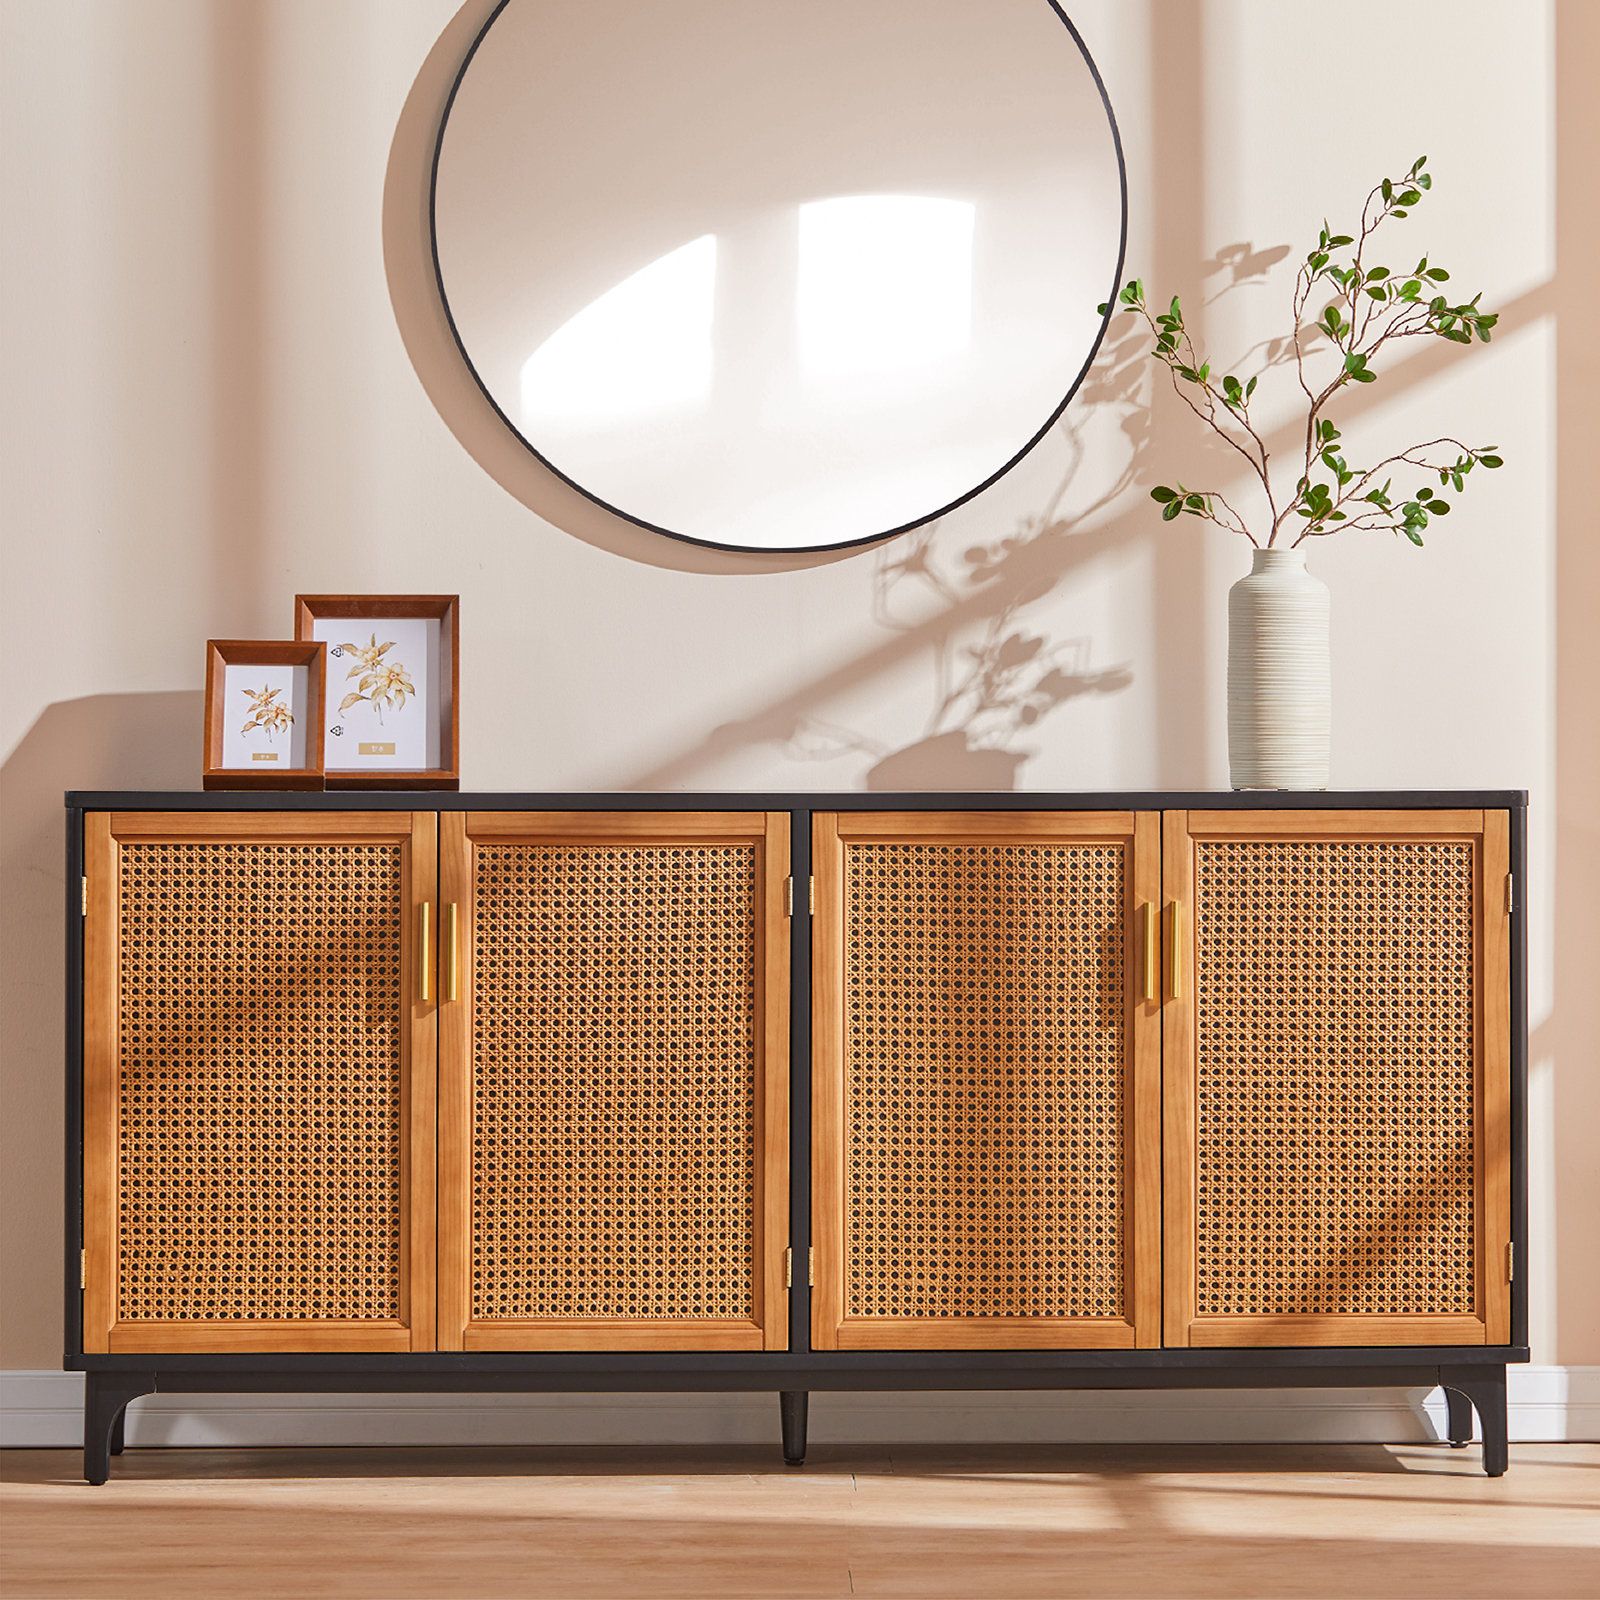 Bay Isle Home Hiawatha Sideboard Buffet Cabinet With Woven Rattan Doors And Adjustable  Shelf & Reviews | Wayfair Throughout Sideboards With Adjustable Shelves (Gallery 5 of 20)